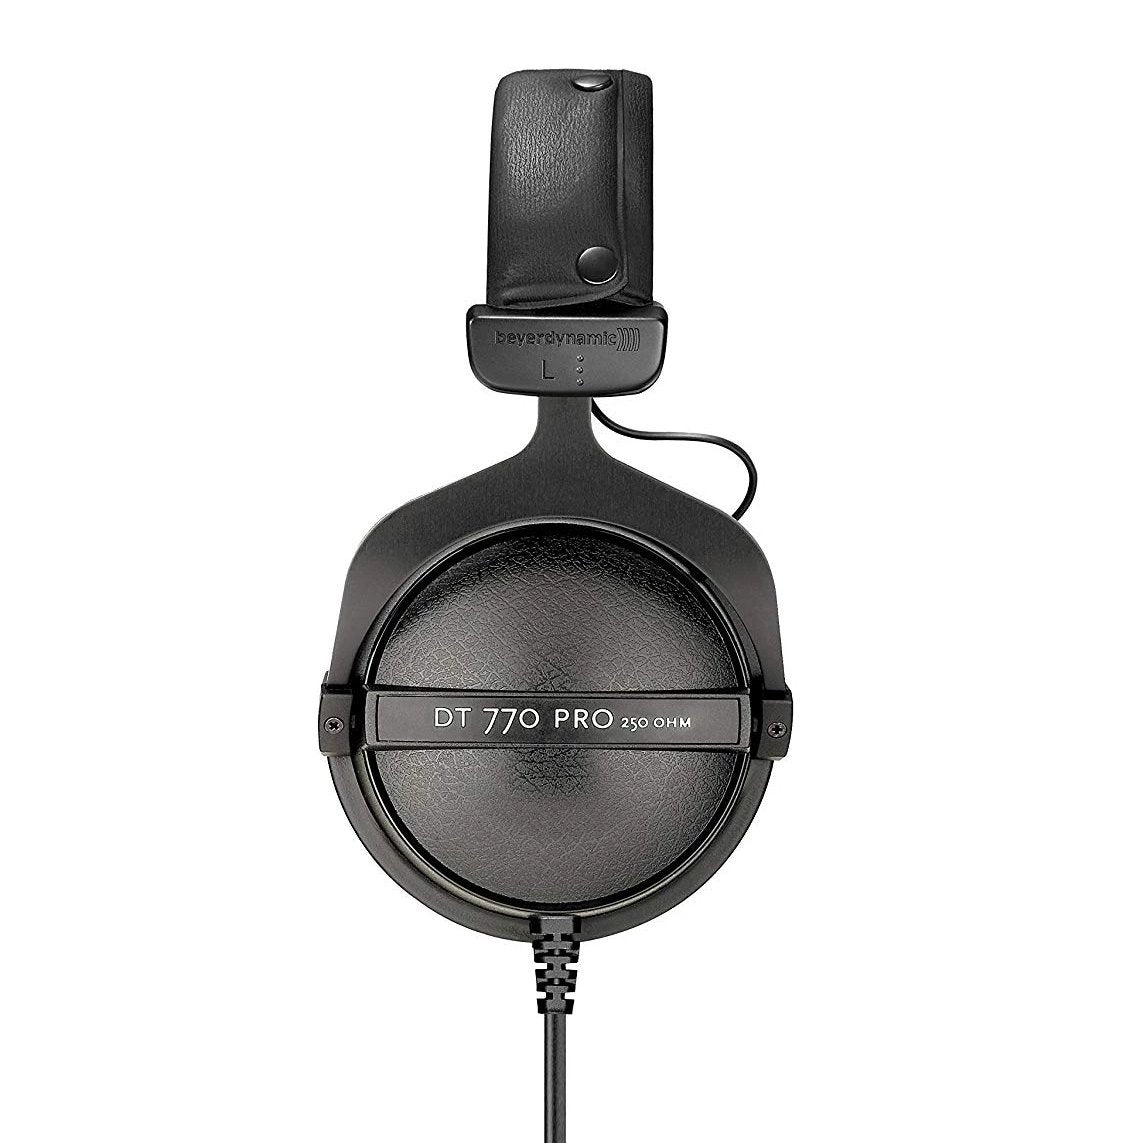 beyerdynamic DT 770 PRO 32 Ohm Over-Ear Headphones in Black. Enclosed  Design, Wired for Professional Sound in The Studio and on Mobile Devices  Such as